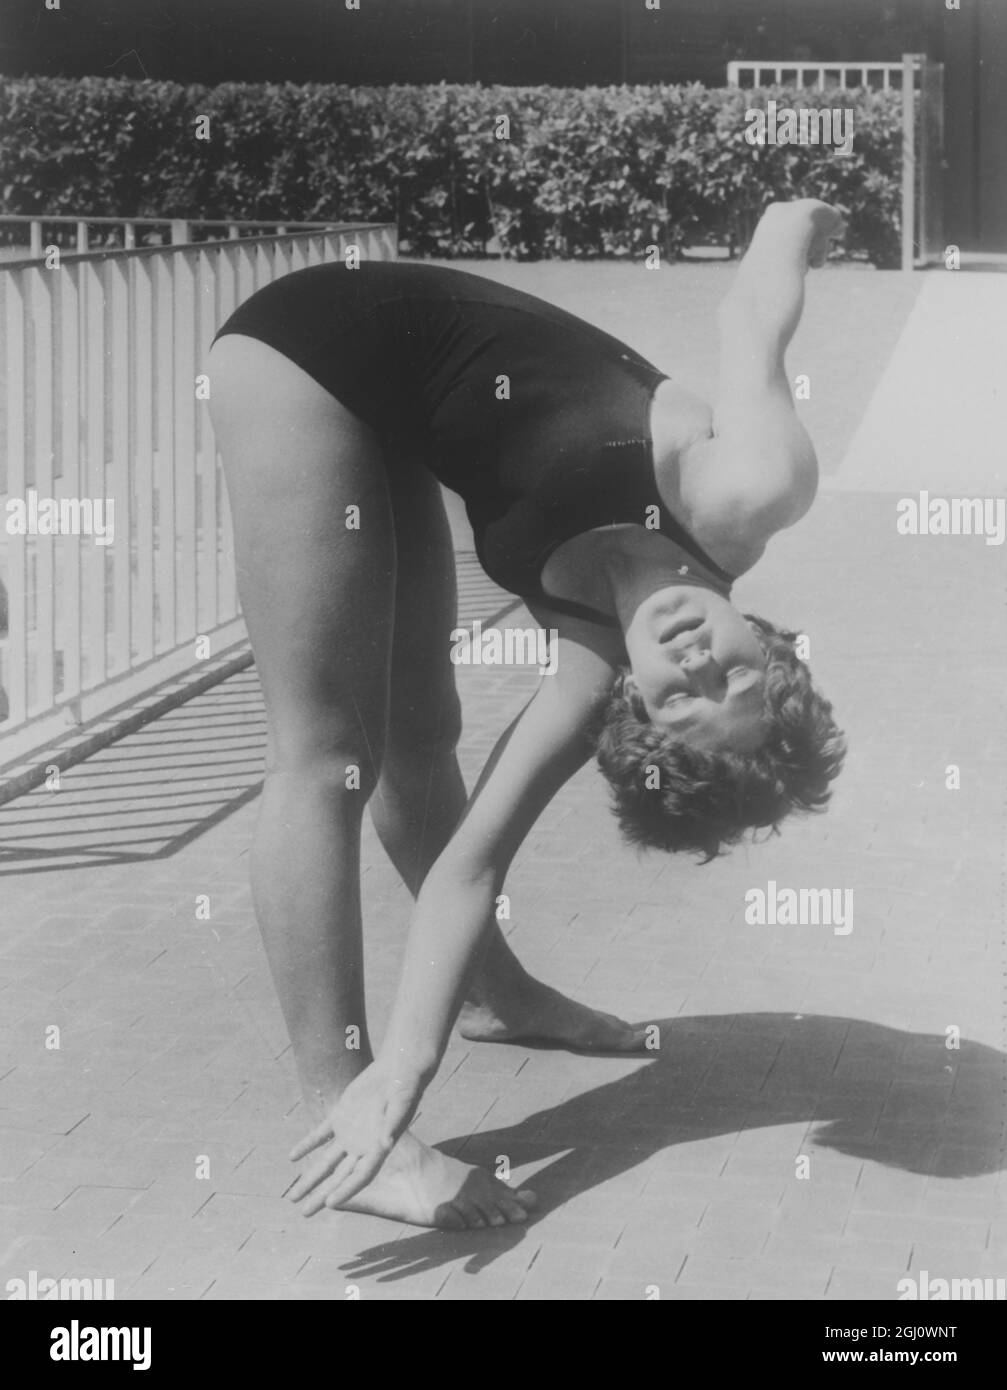 SWIMMING RANWELL LAURA SOUTH AFRICAN AT POOL 19 AUGUST 1960 Stock Photo